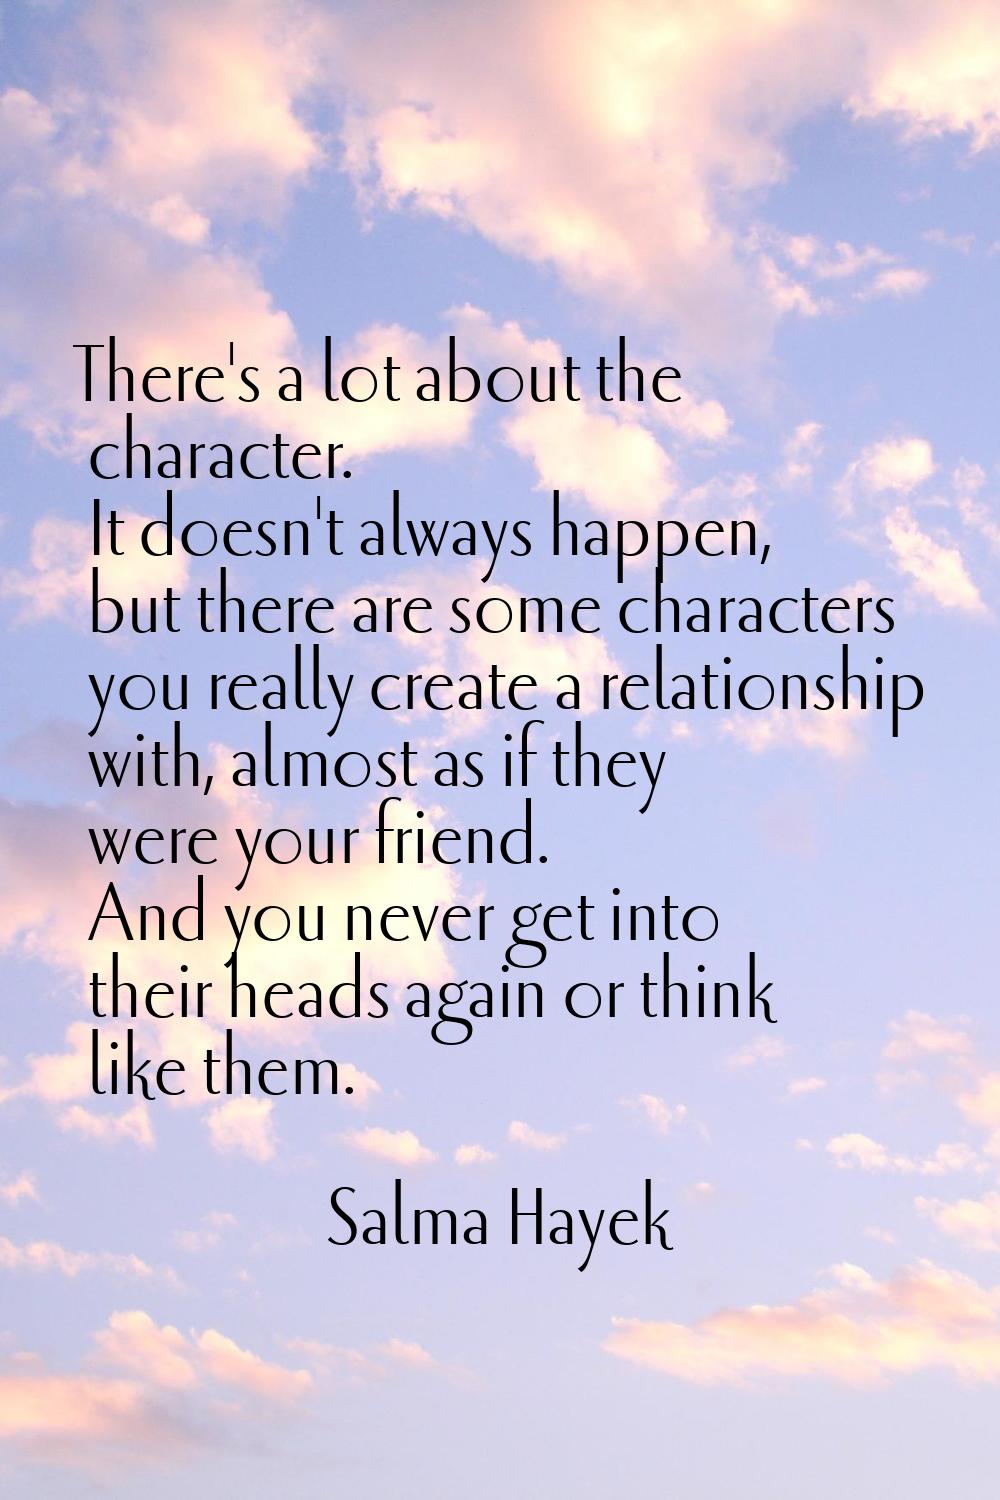 There's a lot about the character. It doesn't always happen, but there are some characters you real